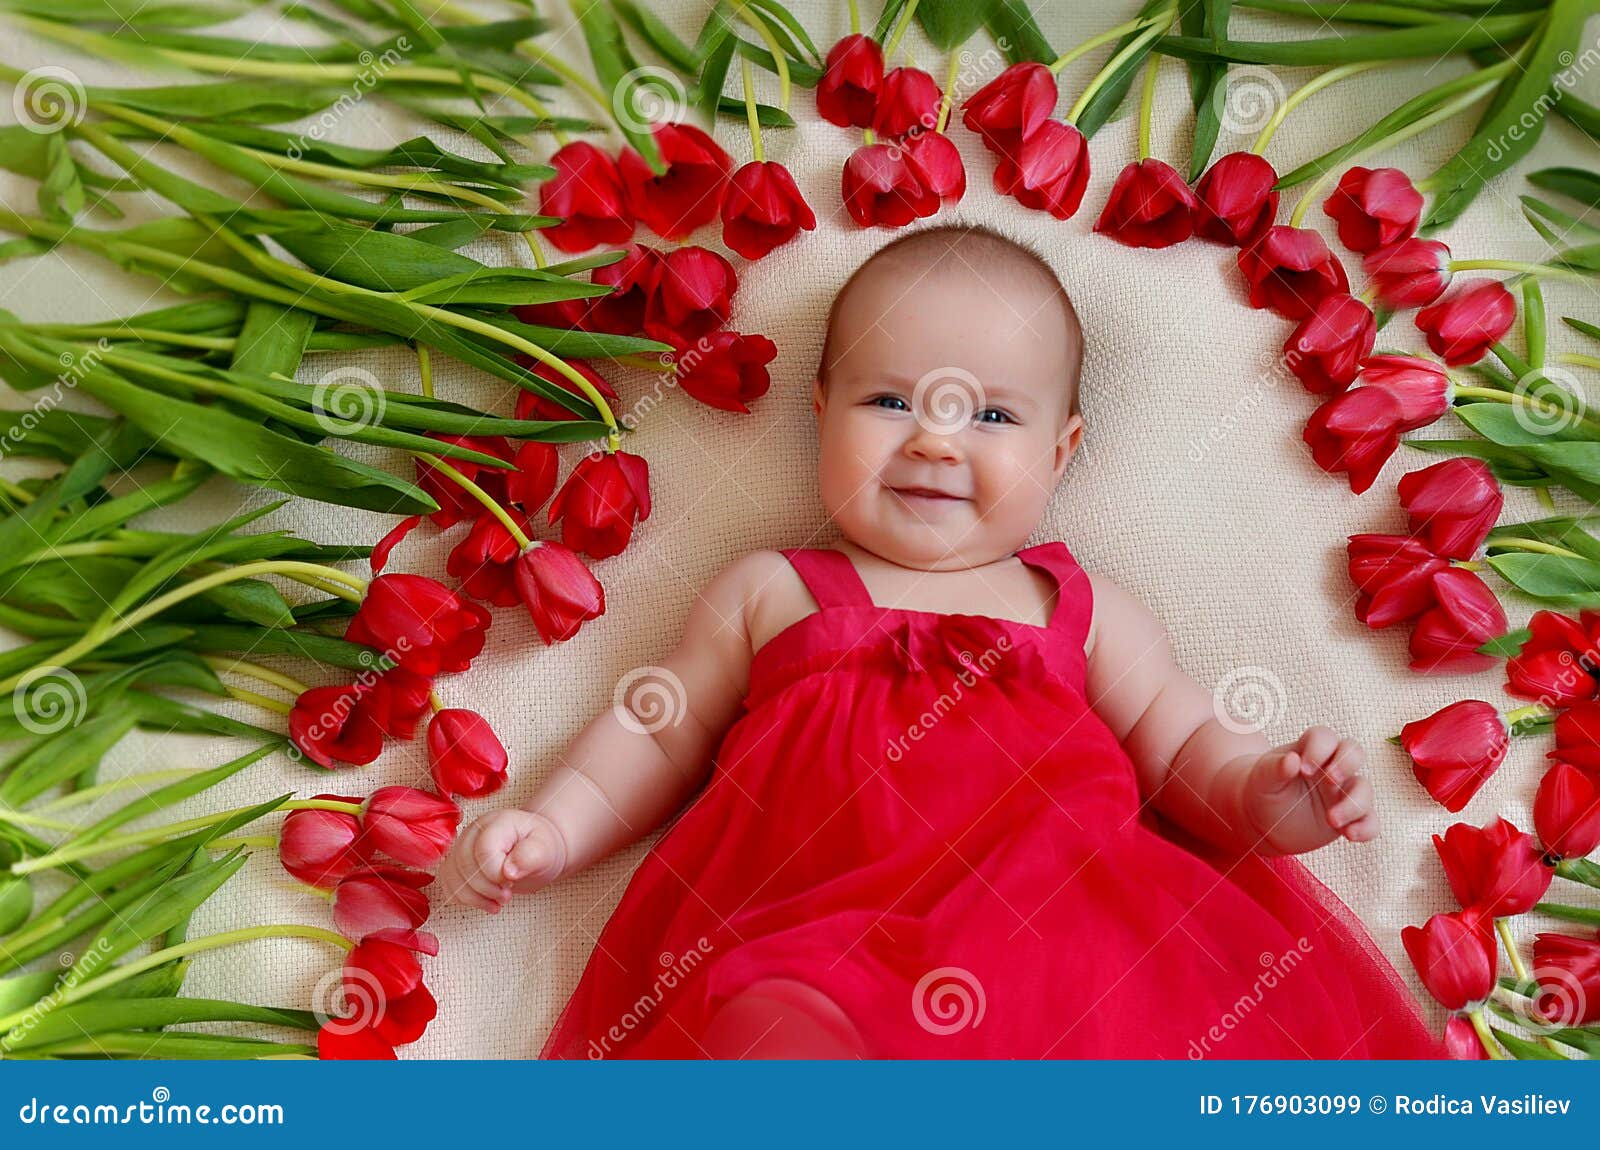 Cute Baby Girl with Flower Tulip Stock Image - Image of tulip ...